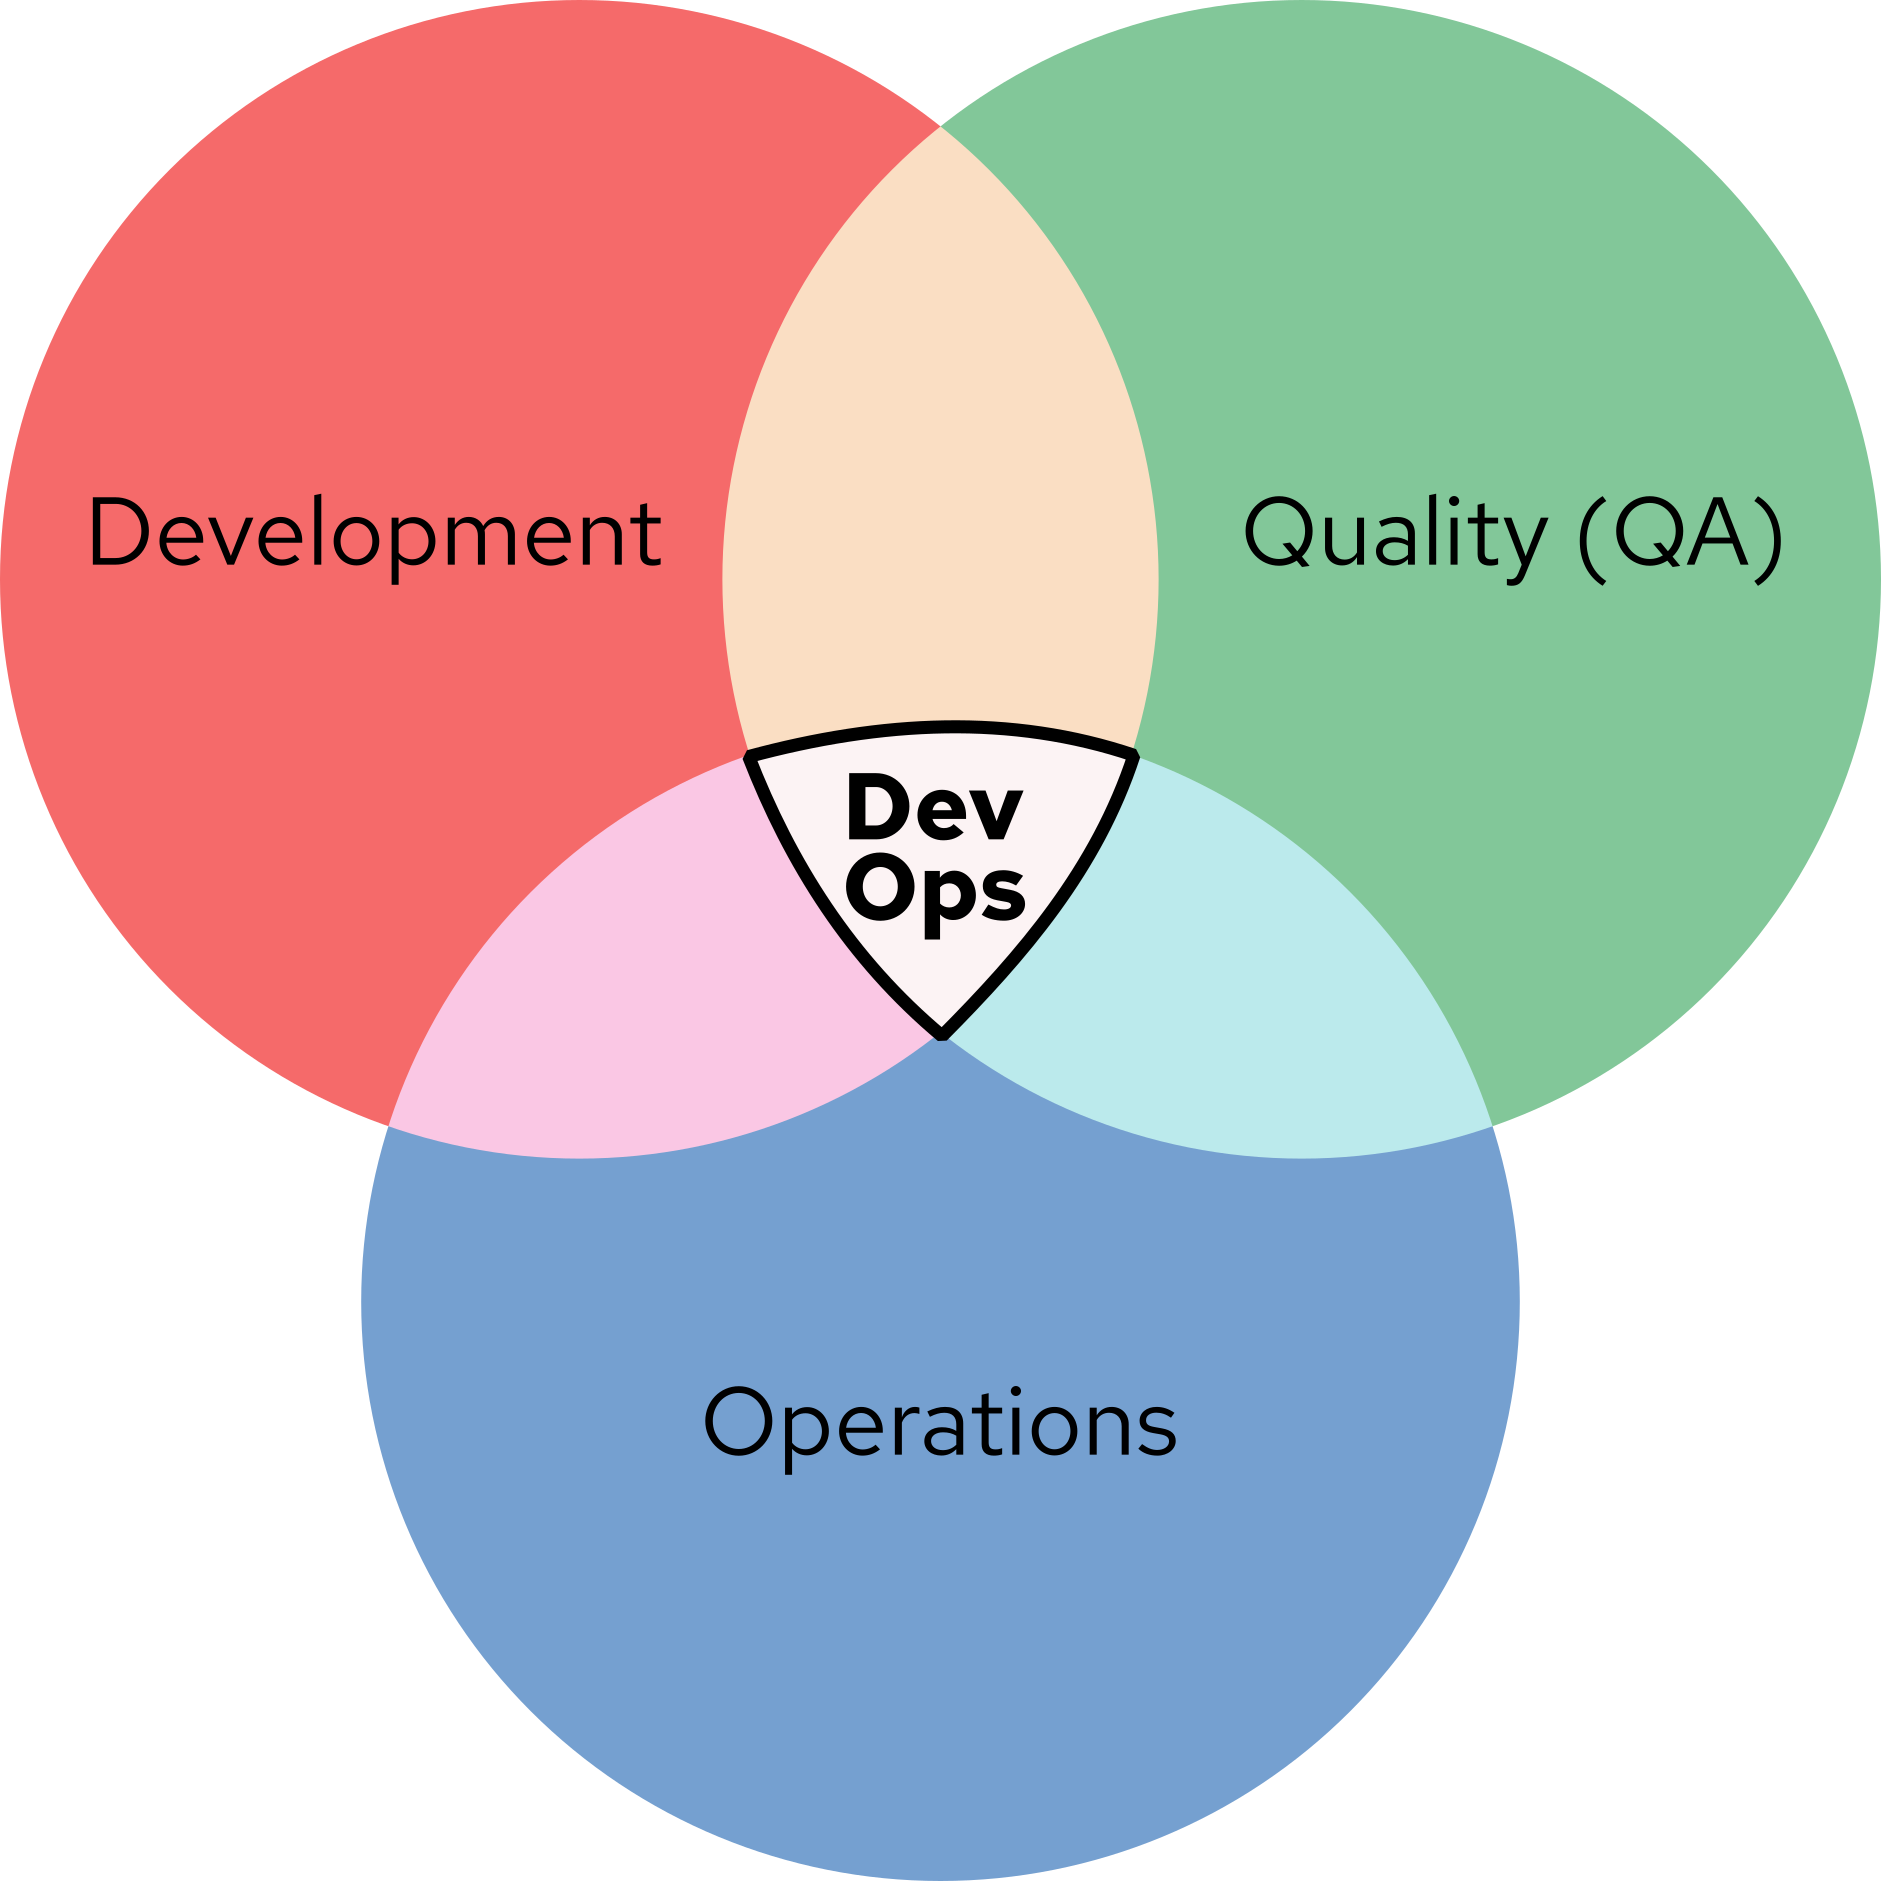 DevOps is the intersection of development, quality assurance, and operations